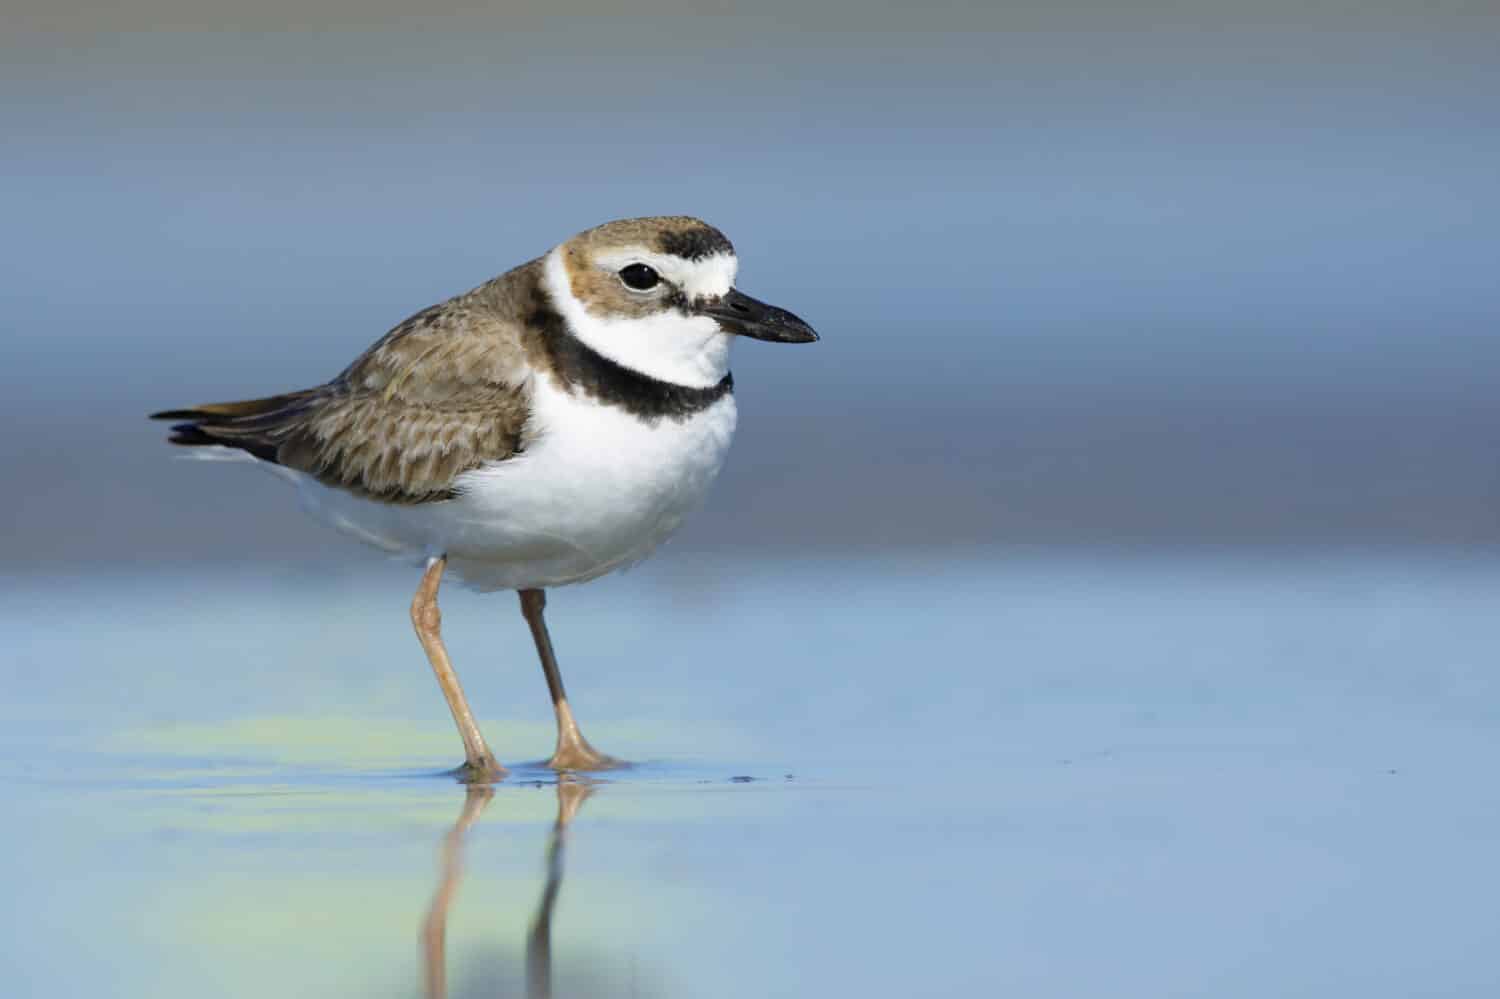 Adult male Wilson's Plover (Charadrius wilsonia) standing on a beach in Galveston County, Texas, USA.